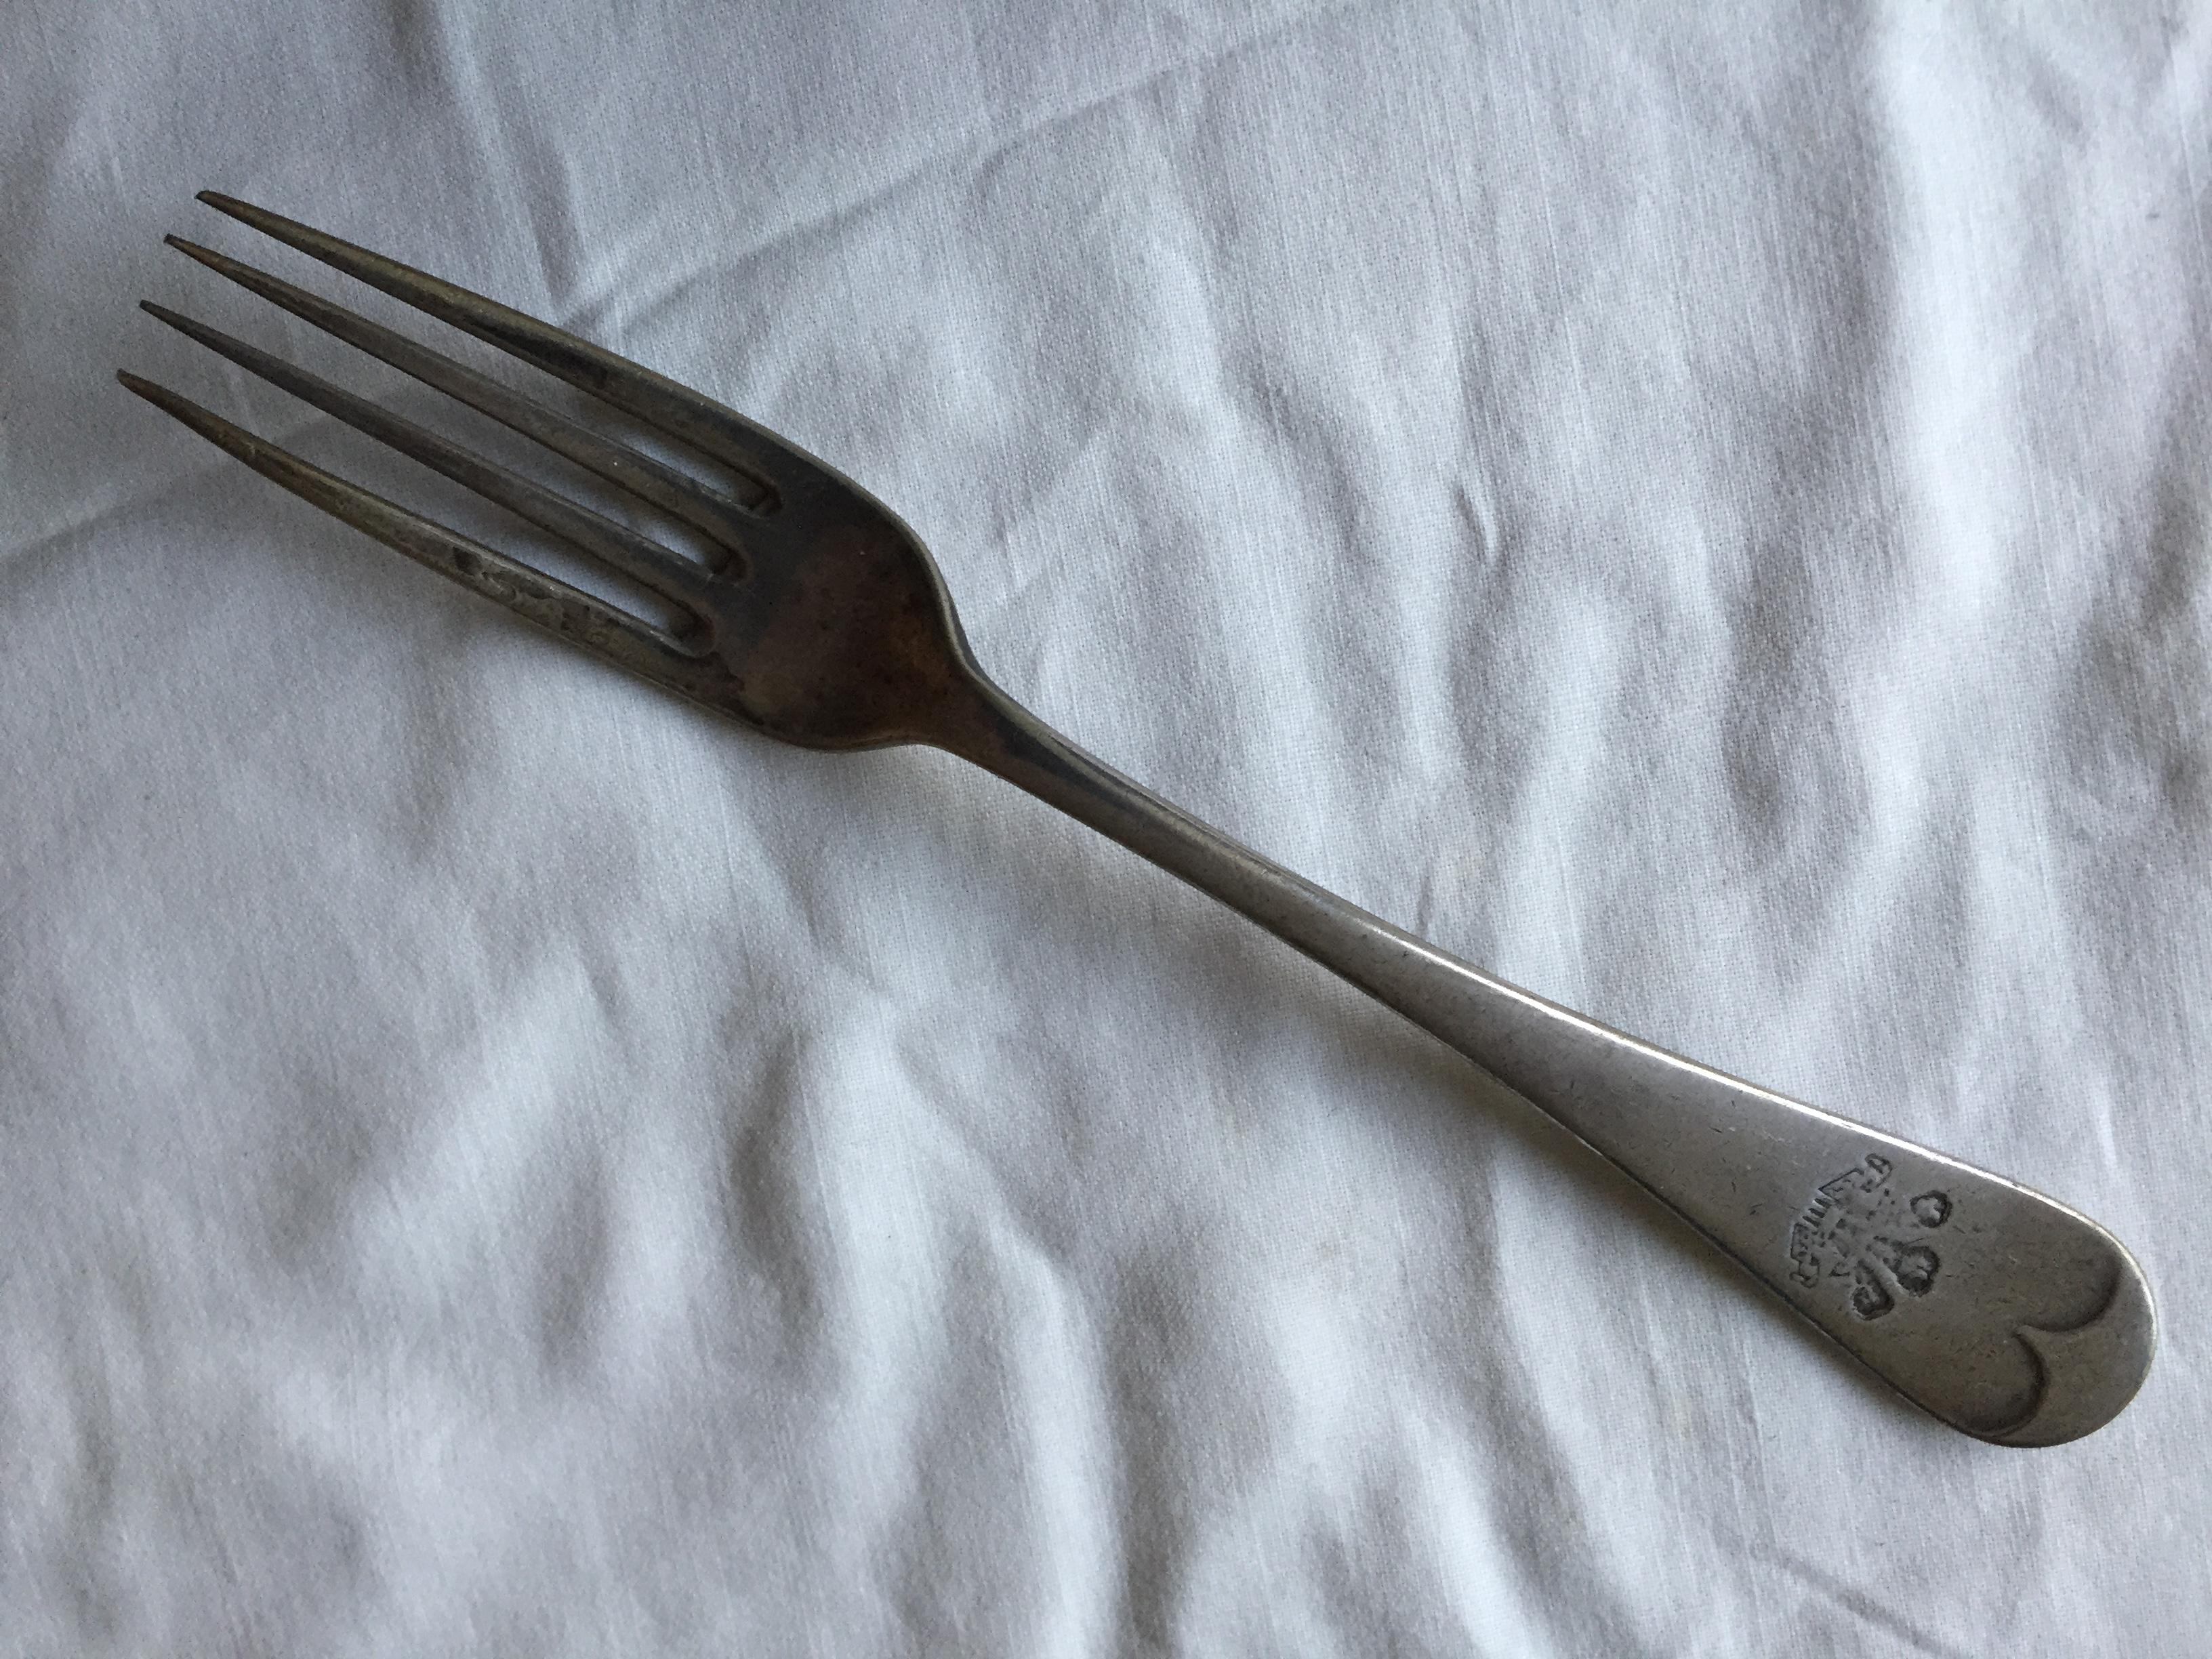  AS USED IN SERVICE DINING FORK FROM THE PRINCE LINE